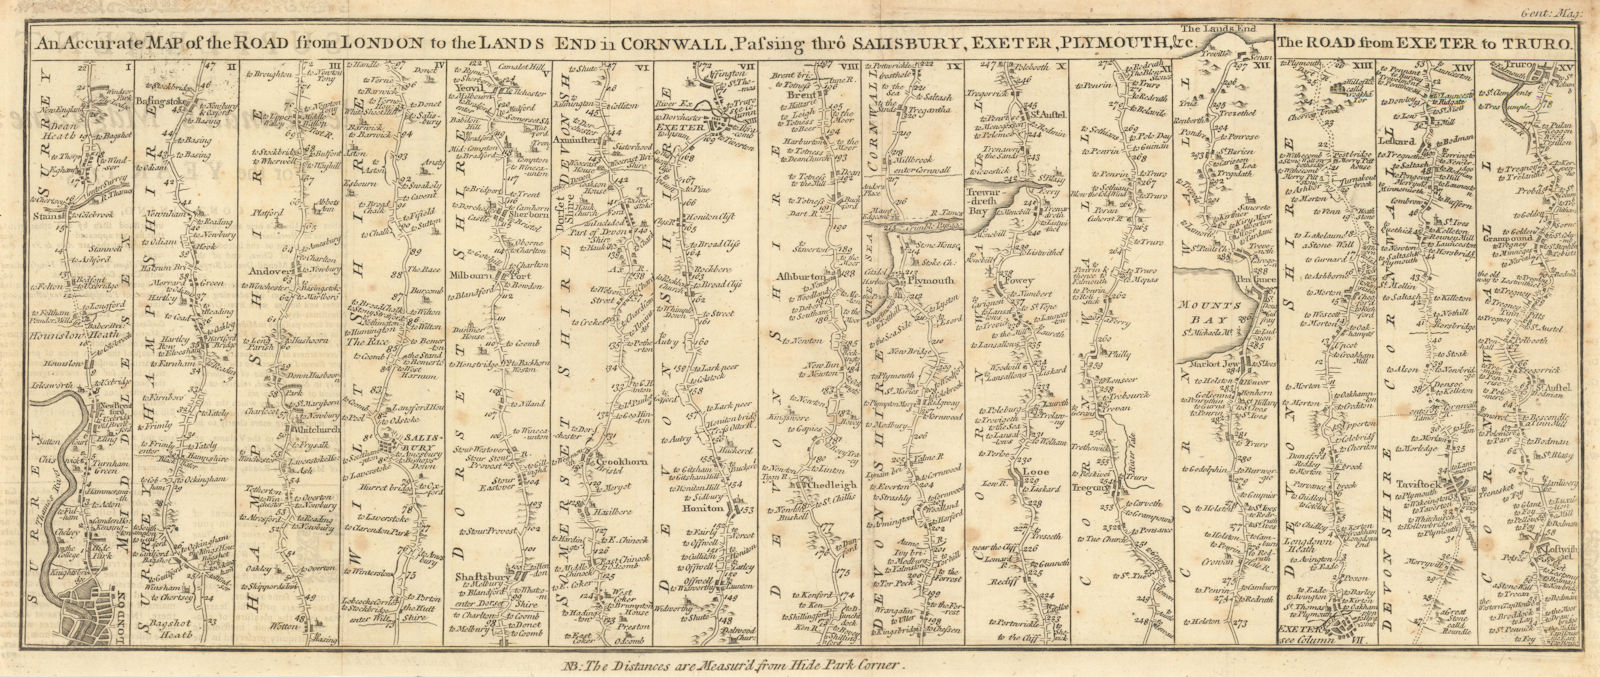 Associate Product The Road from London to Land's End Salisbury Exeter Plymouth… GENTS MAG 1765 map